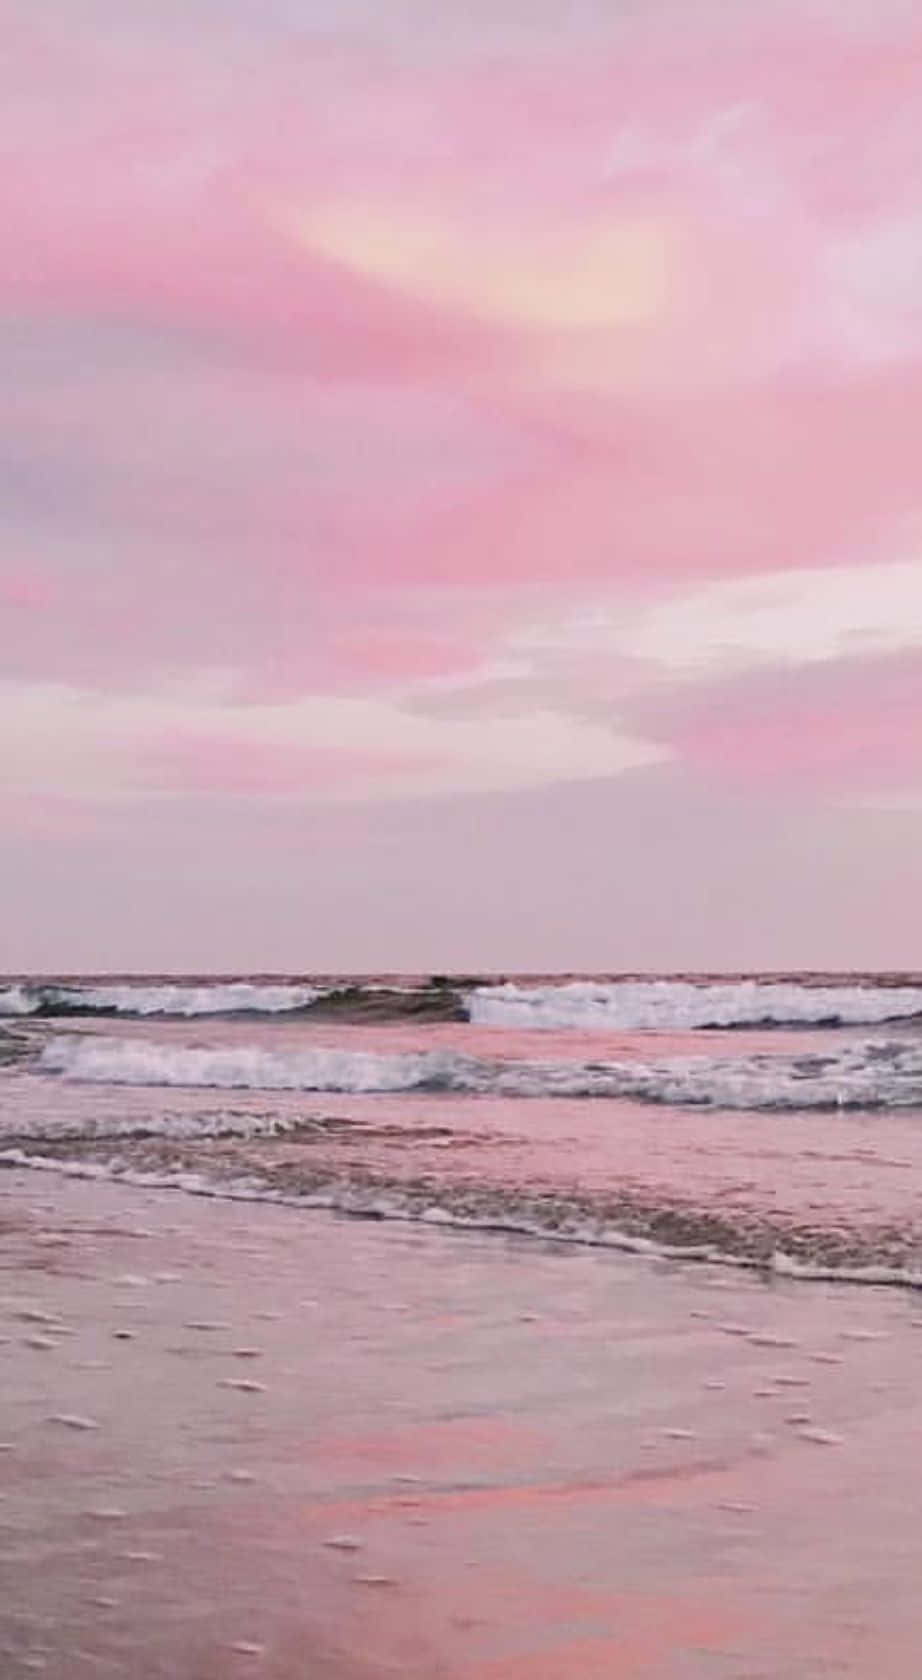 Soft and dreamy shades of light pink that make a beautiful aesthetic